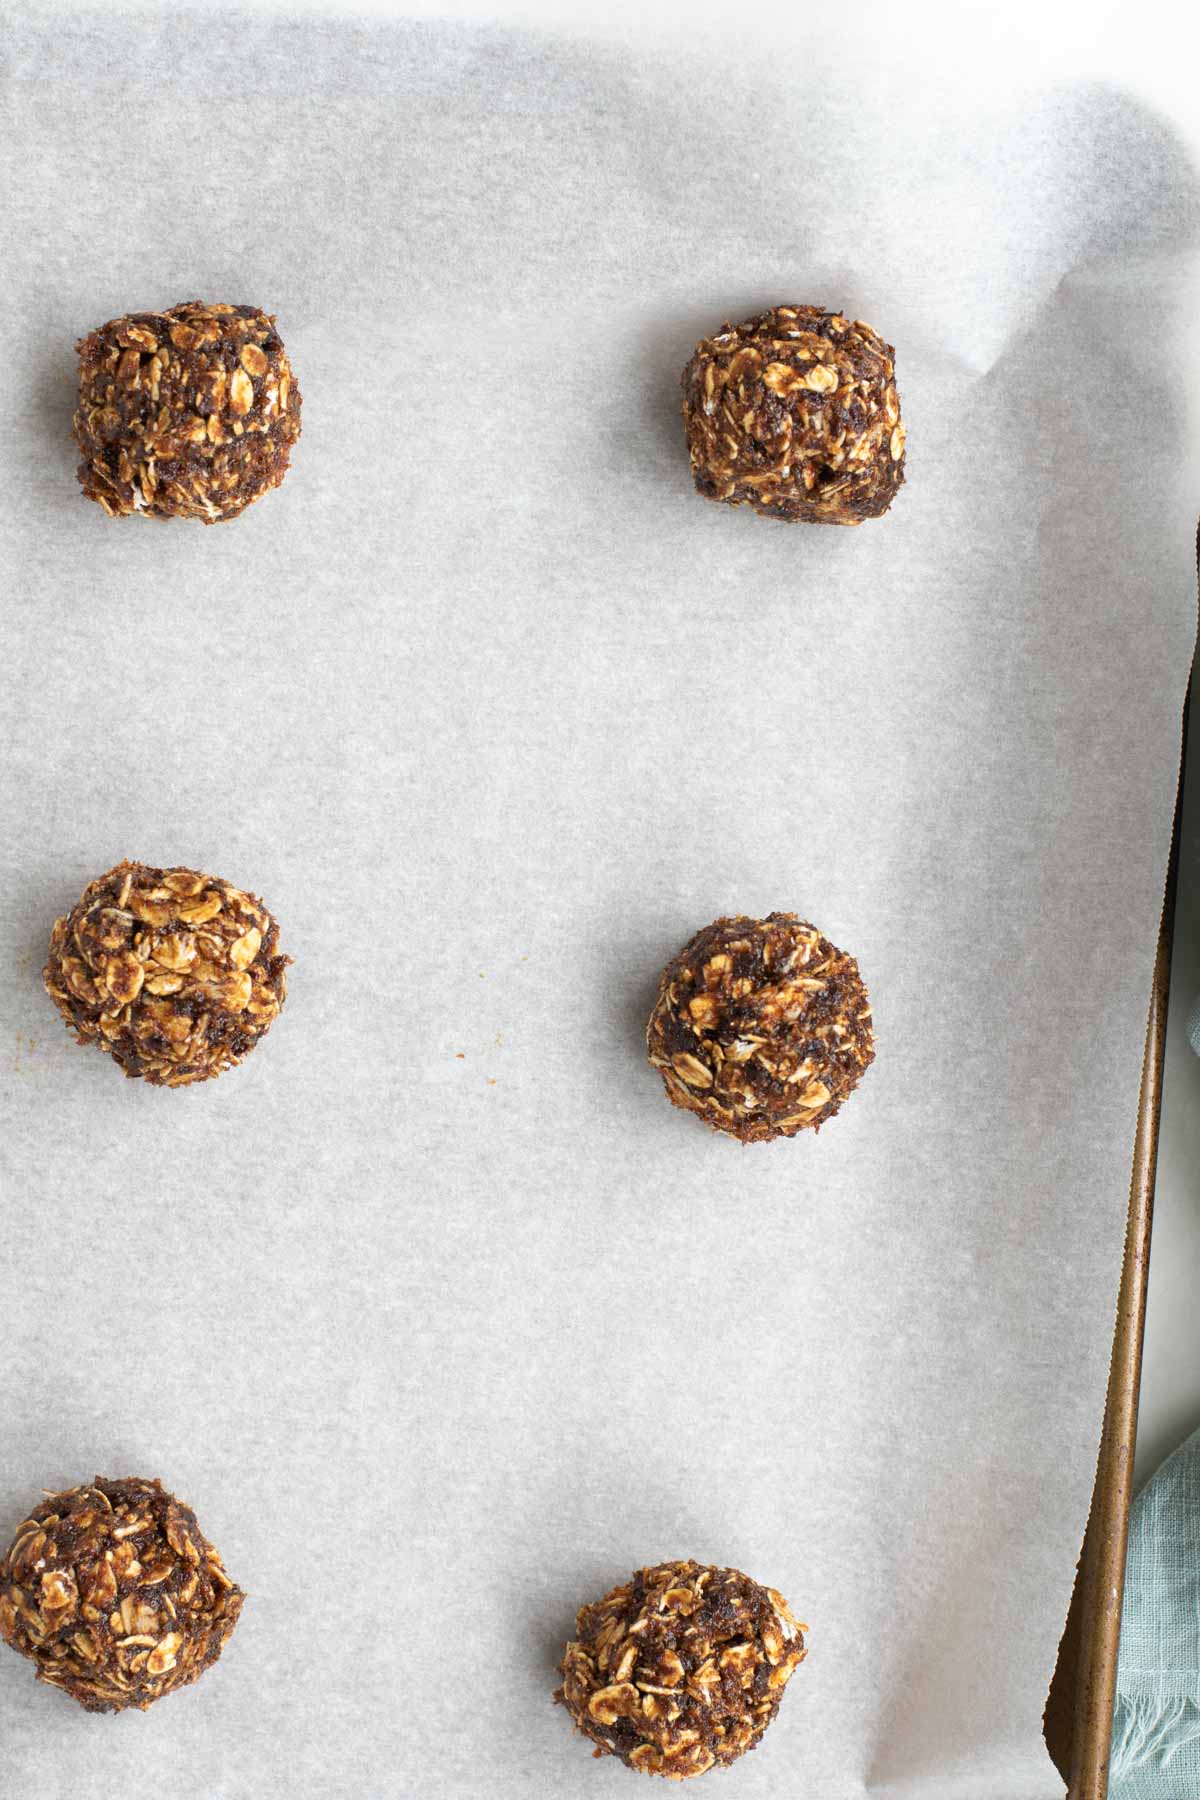 Cookie dough rolled into balls and placed in rows on parchment lined baking sheet.